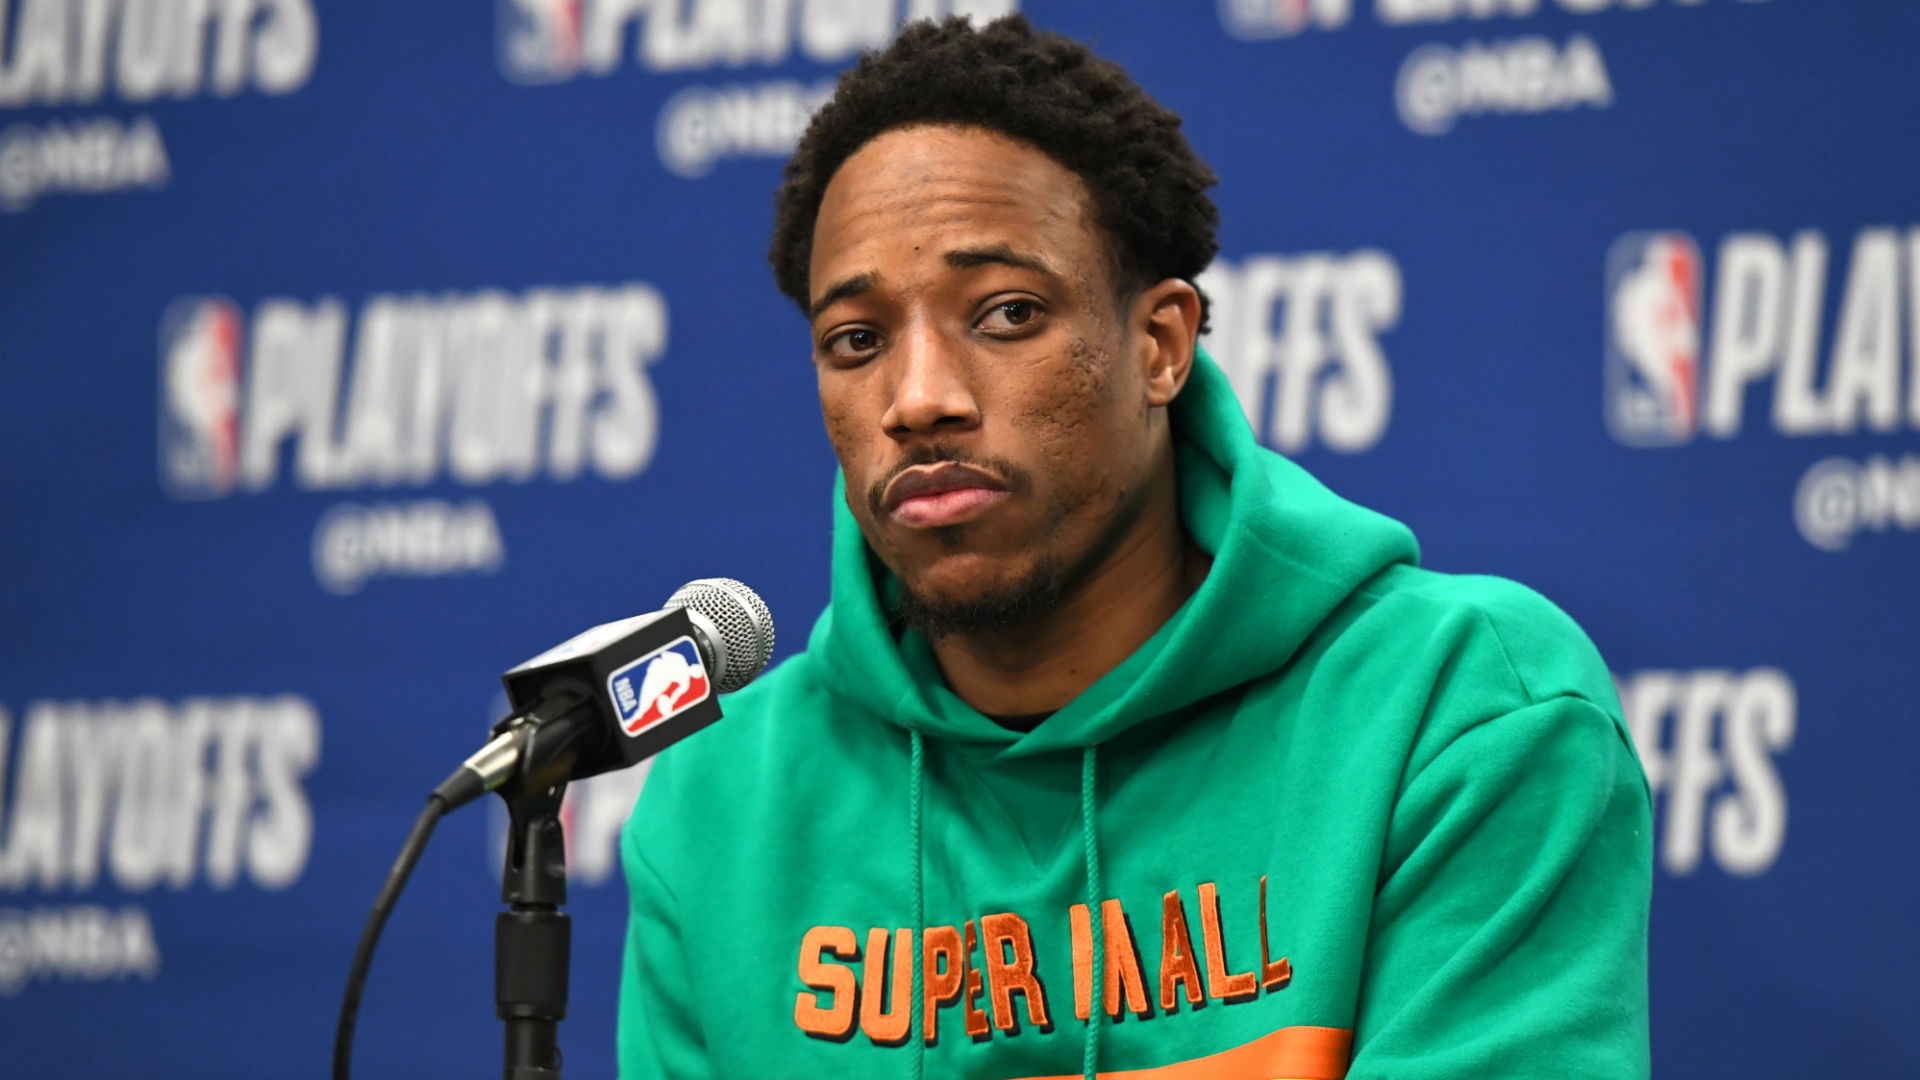 NBA Playoffs 2019: After Game 1 win, DeRozan insists Spurs 'can't lean' on having more ...